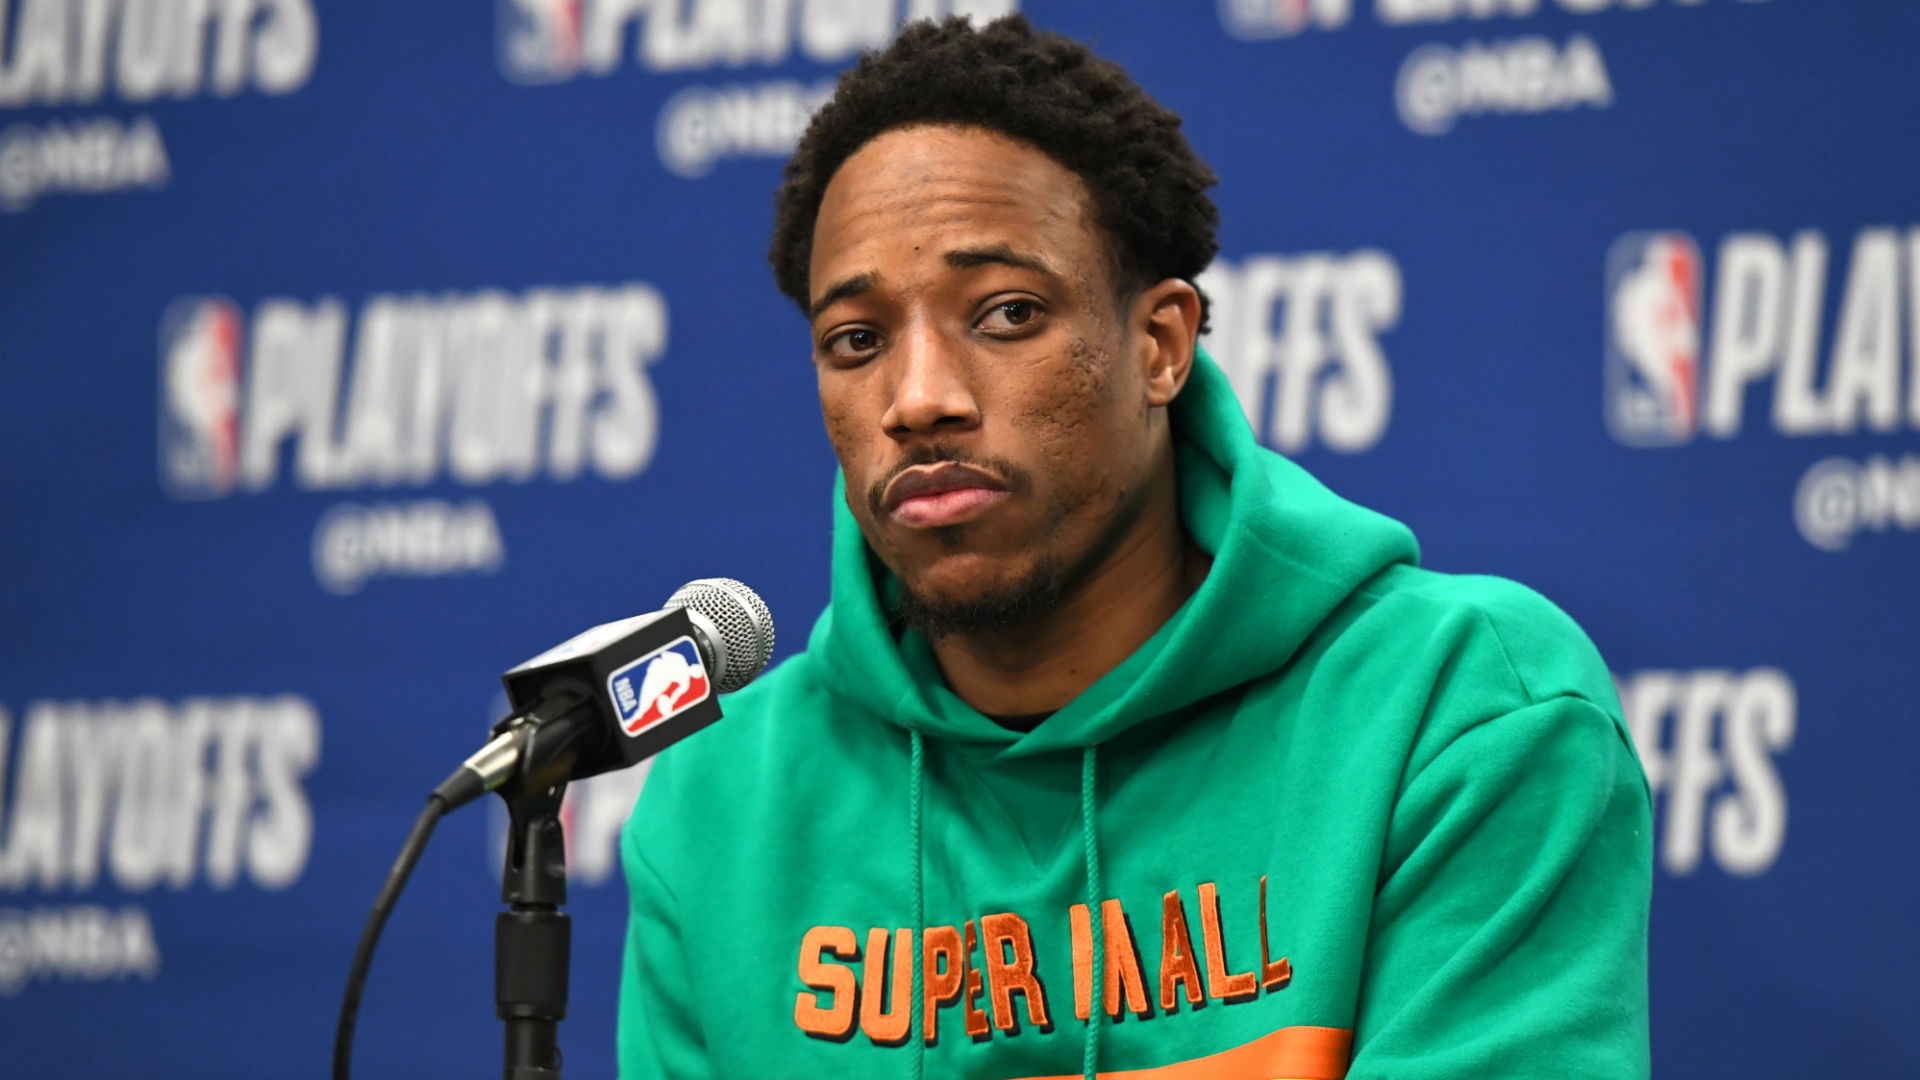 NBA Playoffs 2019: After Game 1 win, DeRozan insists Spurs 'can't lean' on having more ...